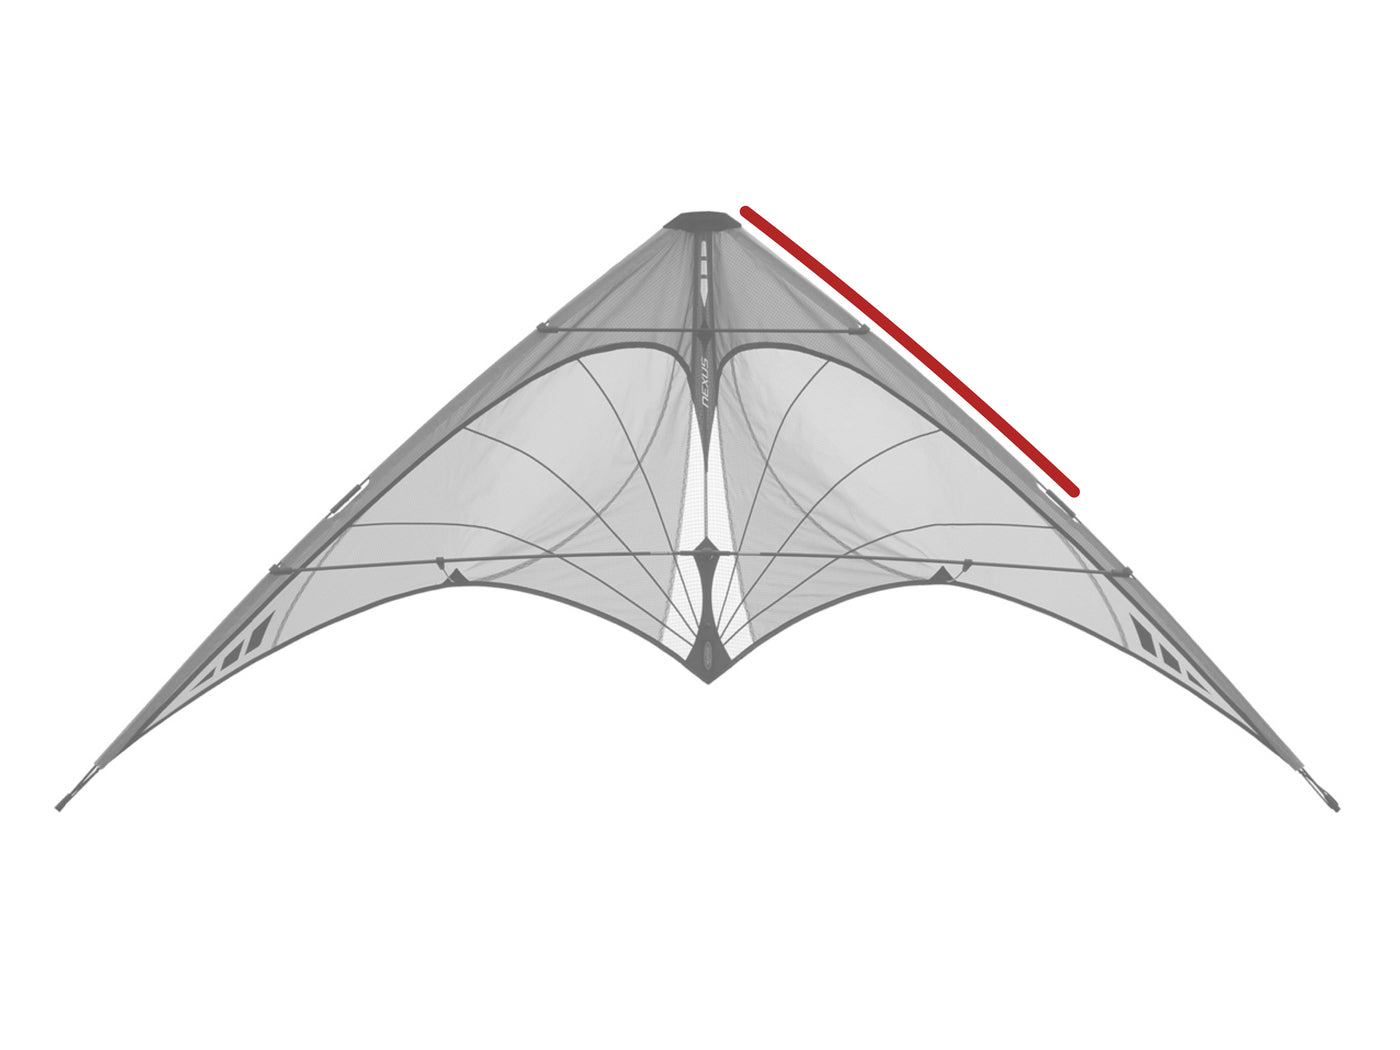 Diagram showing location of the Nexus Upper Leading Edge on the kite.